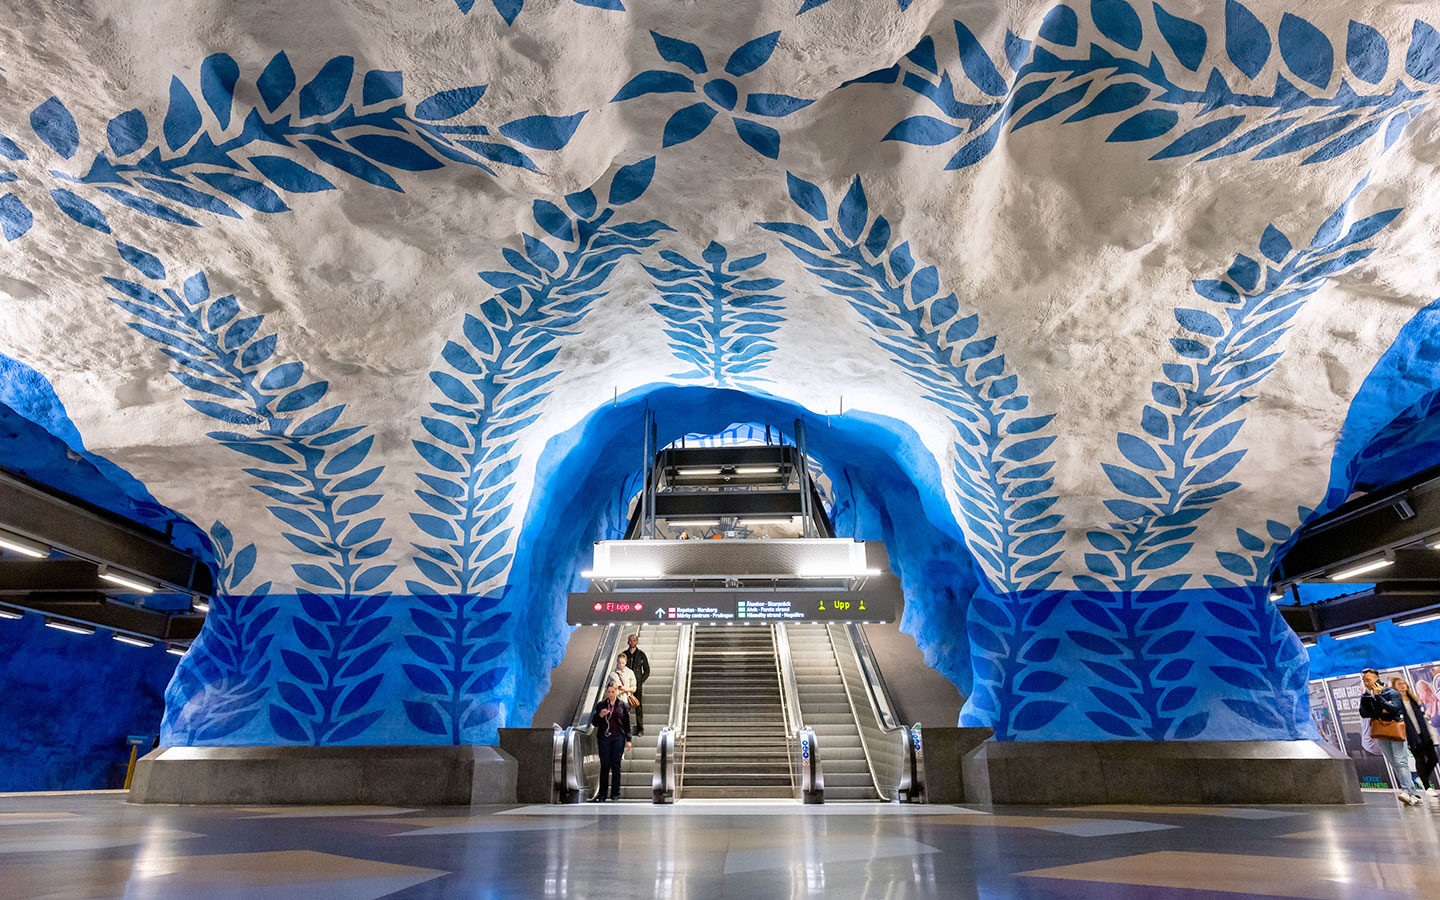 Painted walls in the Stockholm Metro, Sweden